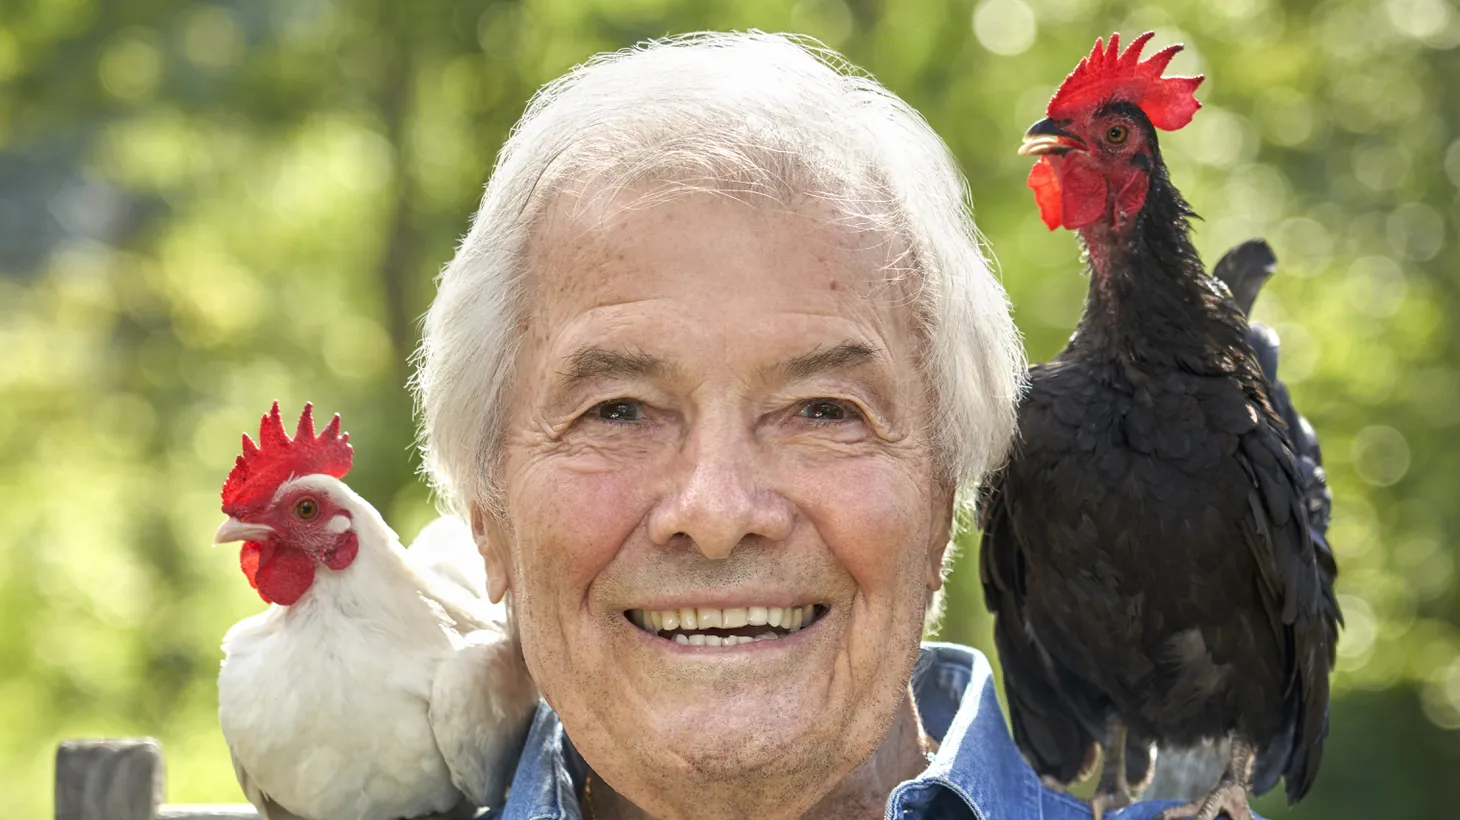 Jacques Pépin shares stories including his teenage years during the war, when a group of friends caught a chicken and cooked it in clay found along the river.